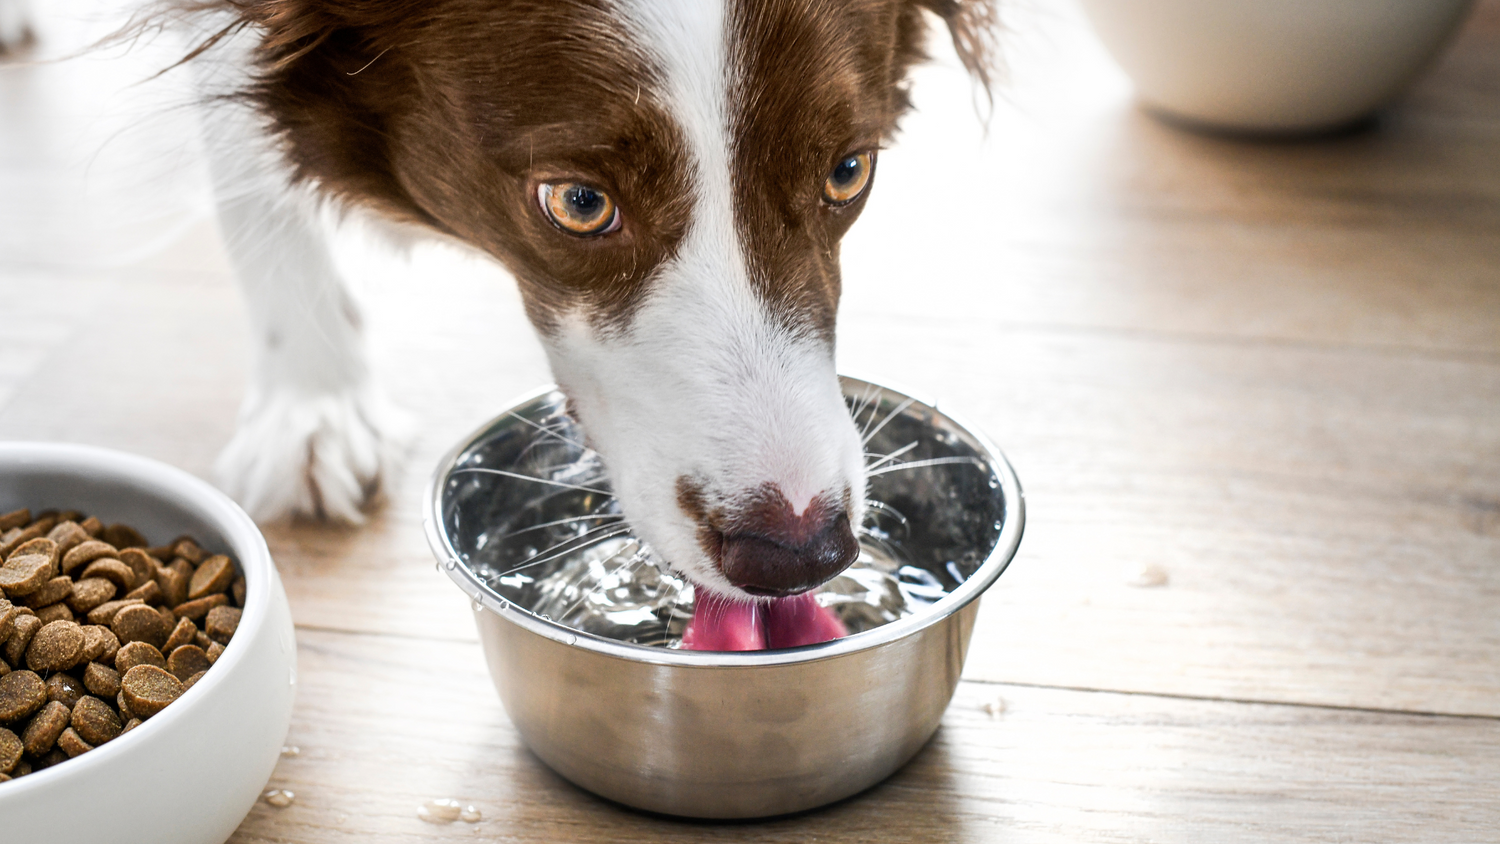 How Much Water Should A Dog Drink? What to Know About Keeping Your Dog Hydrated | Tartar Shield Health